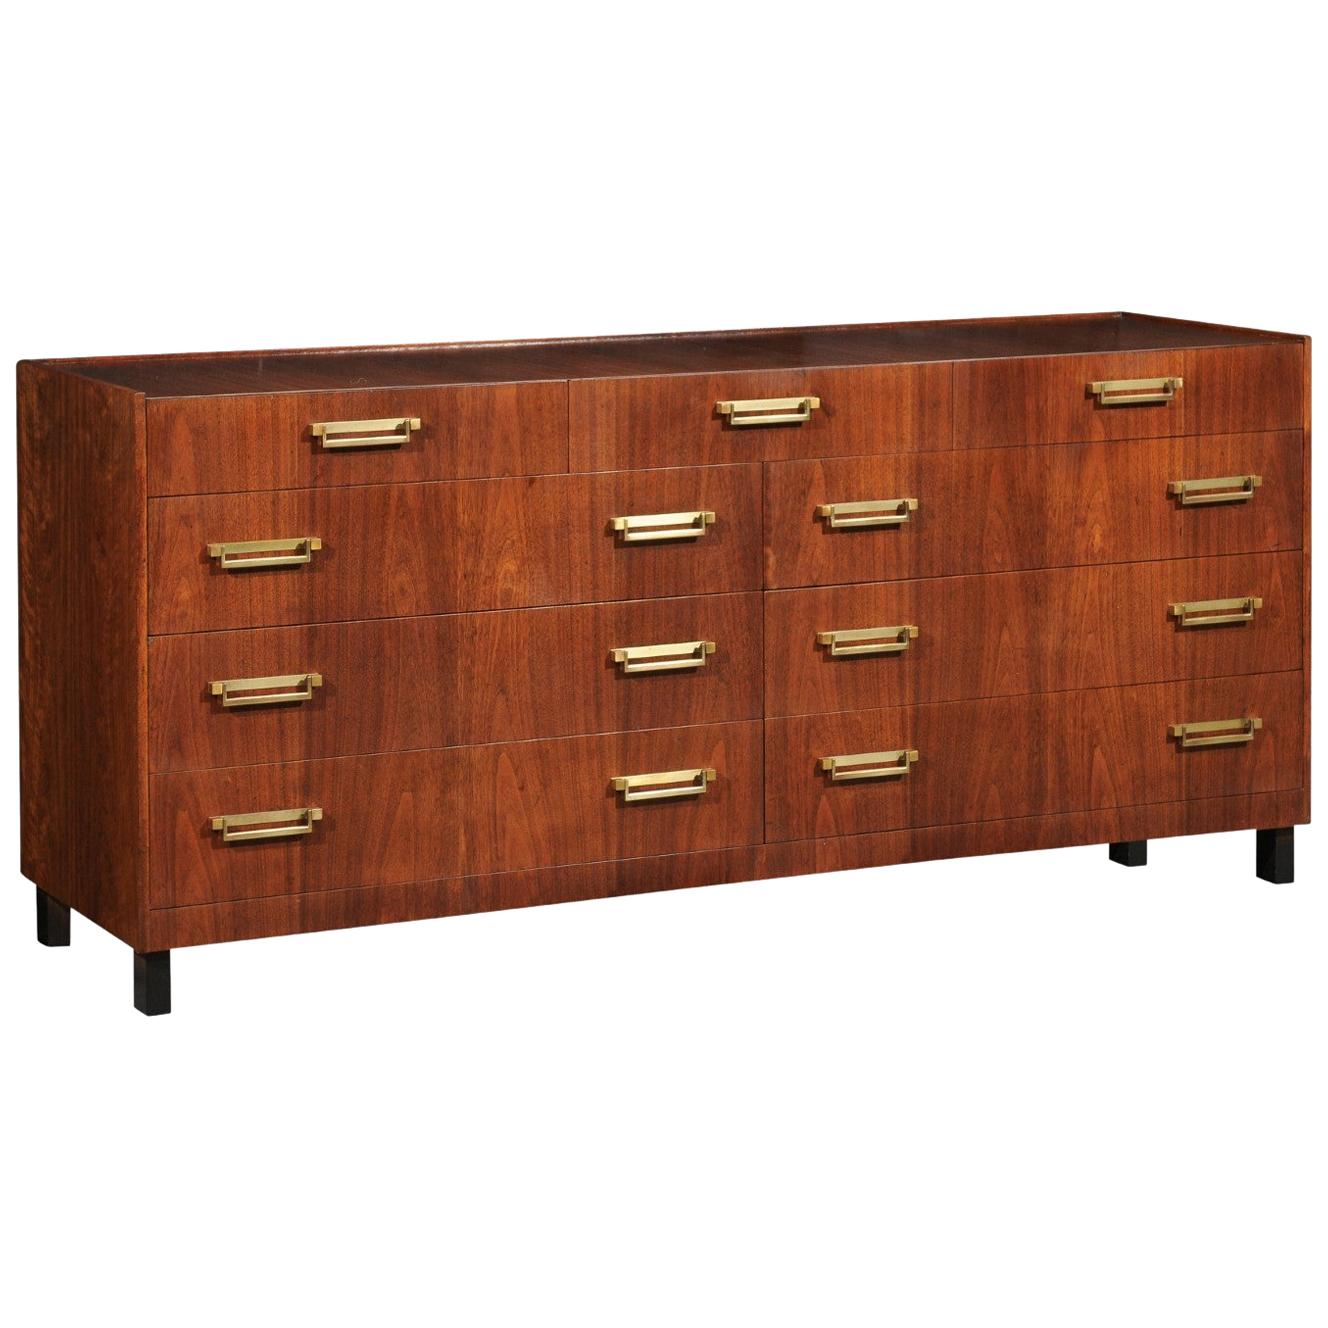 Exquisite Modern Campaign Chest by Michael Taylor for Baker, circa 1960